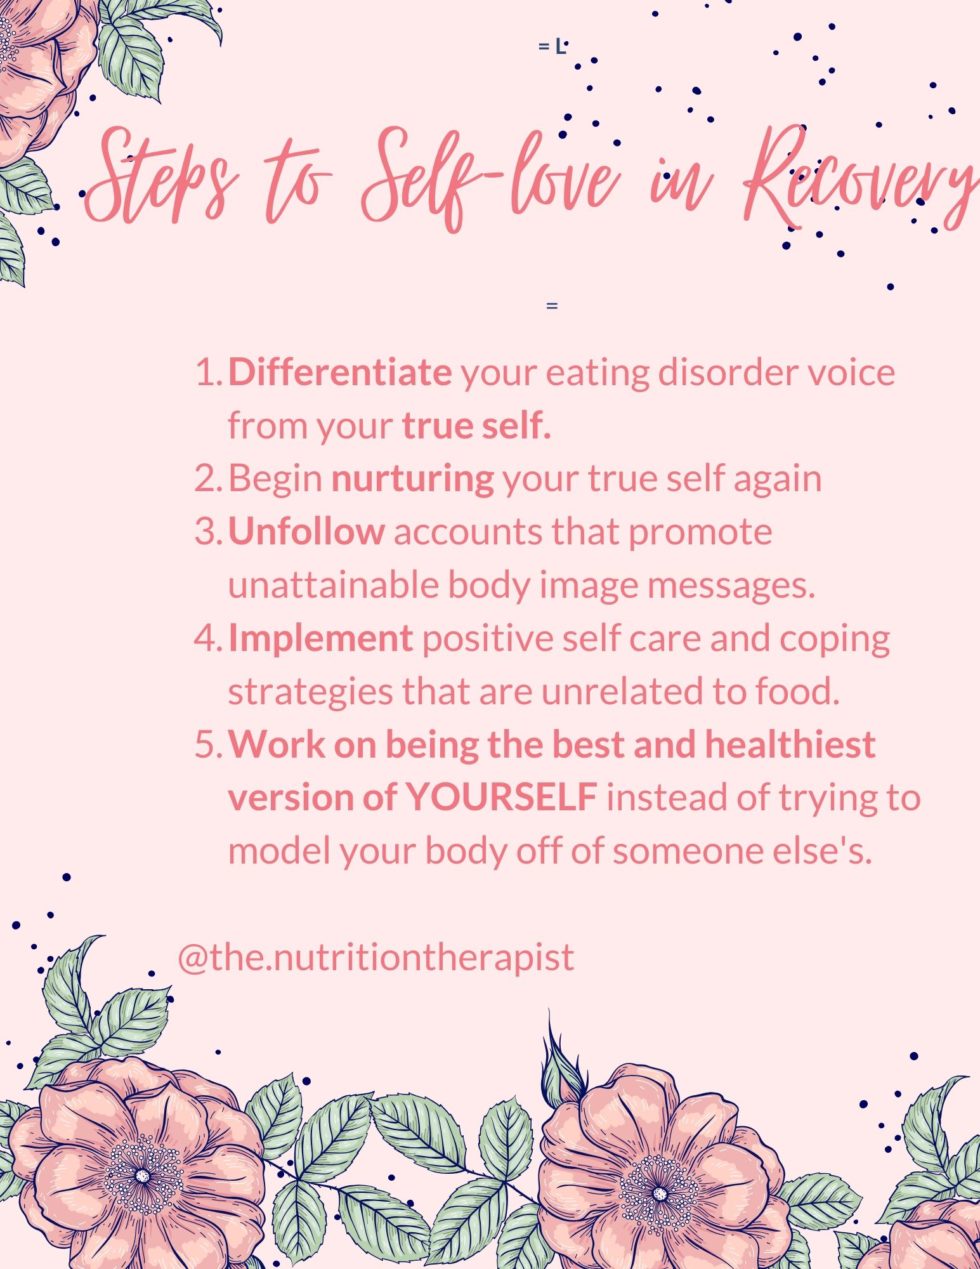 steps to self-love or recovery